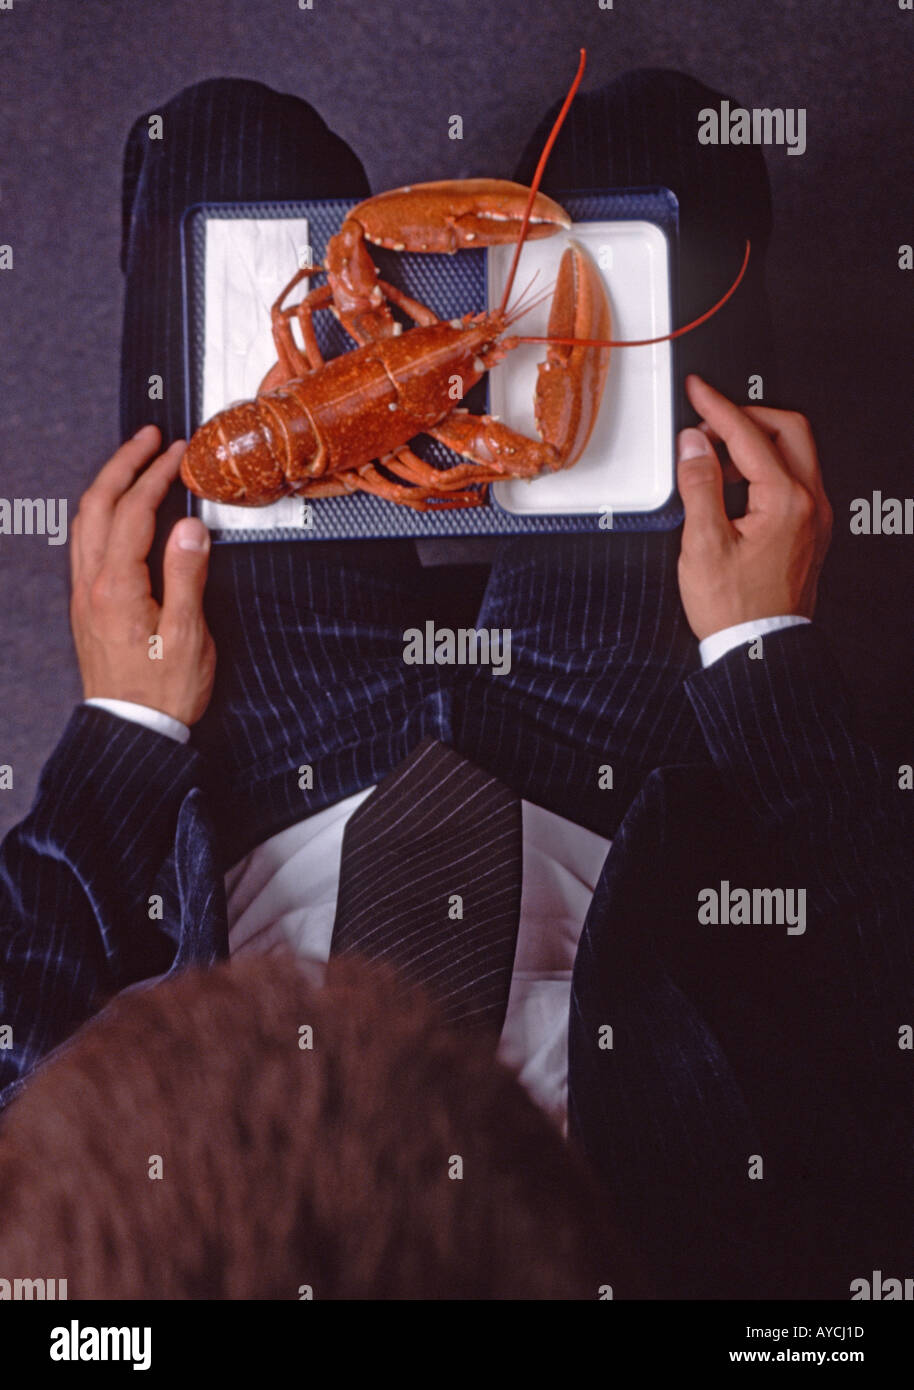 businessman sittin in an aircraft seat eating a lobster Stock Photo